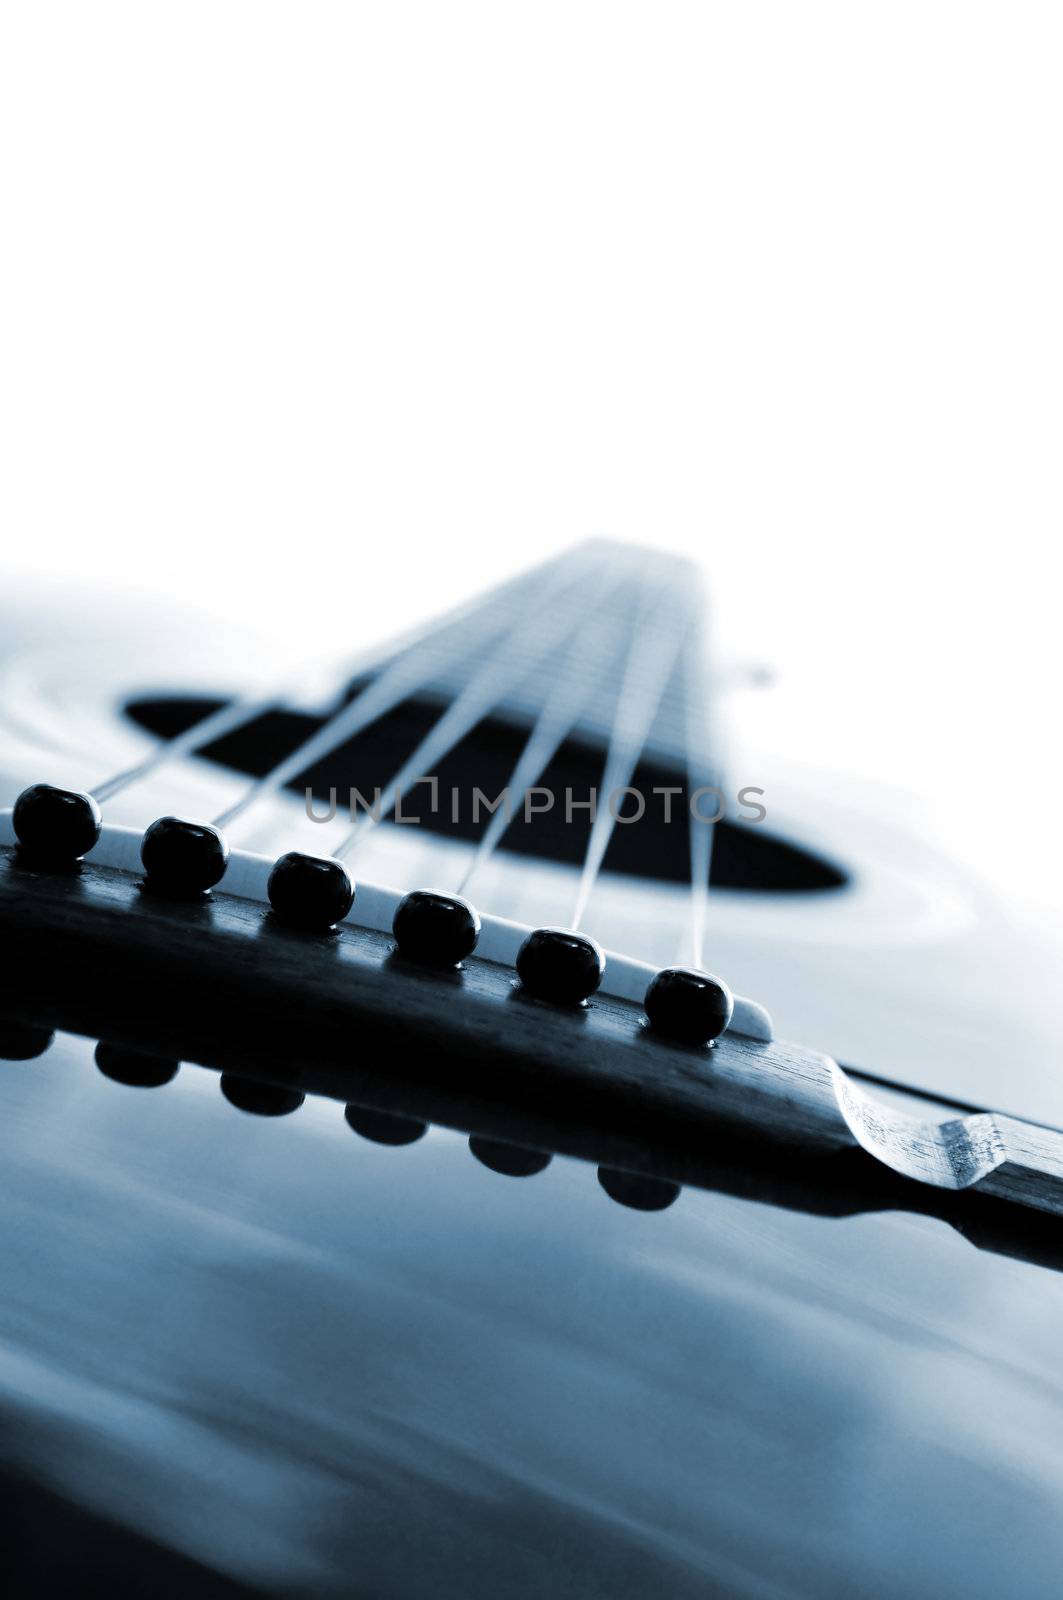 Acoustic guitar close up on white background